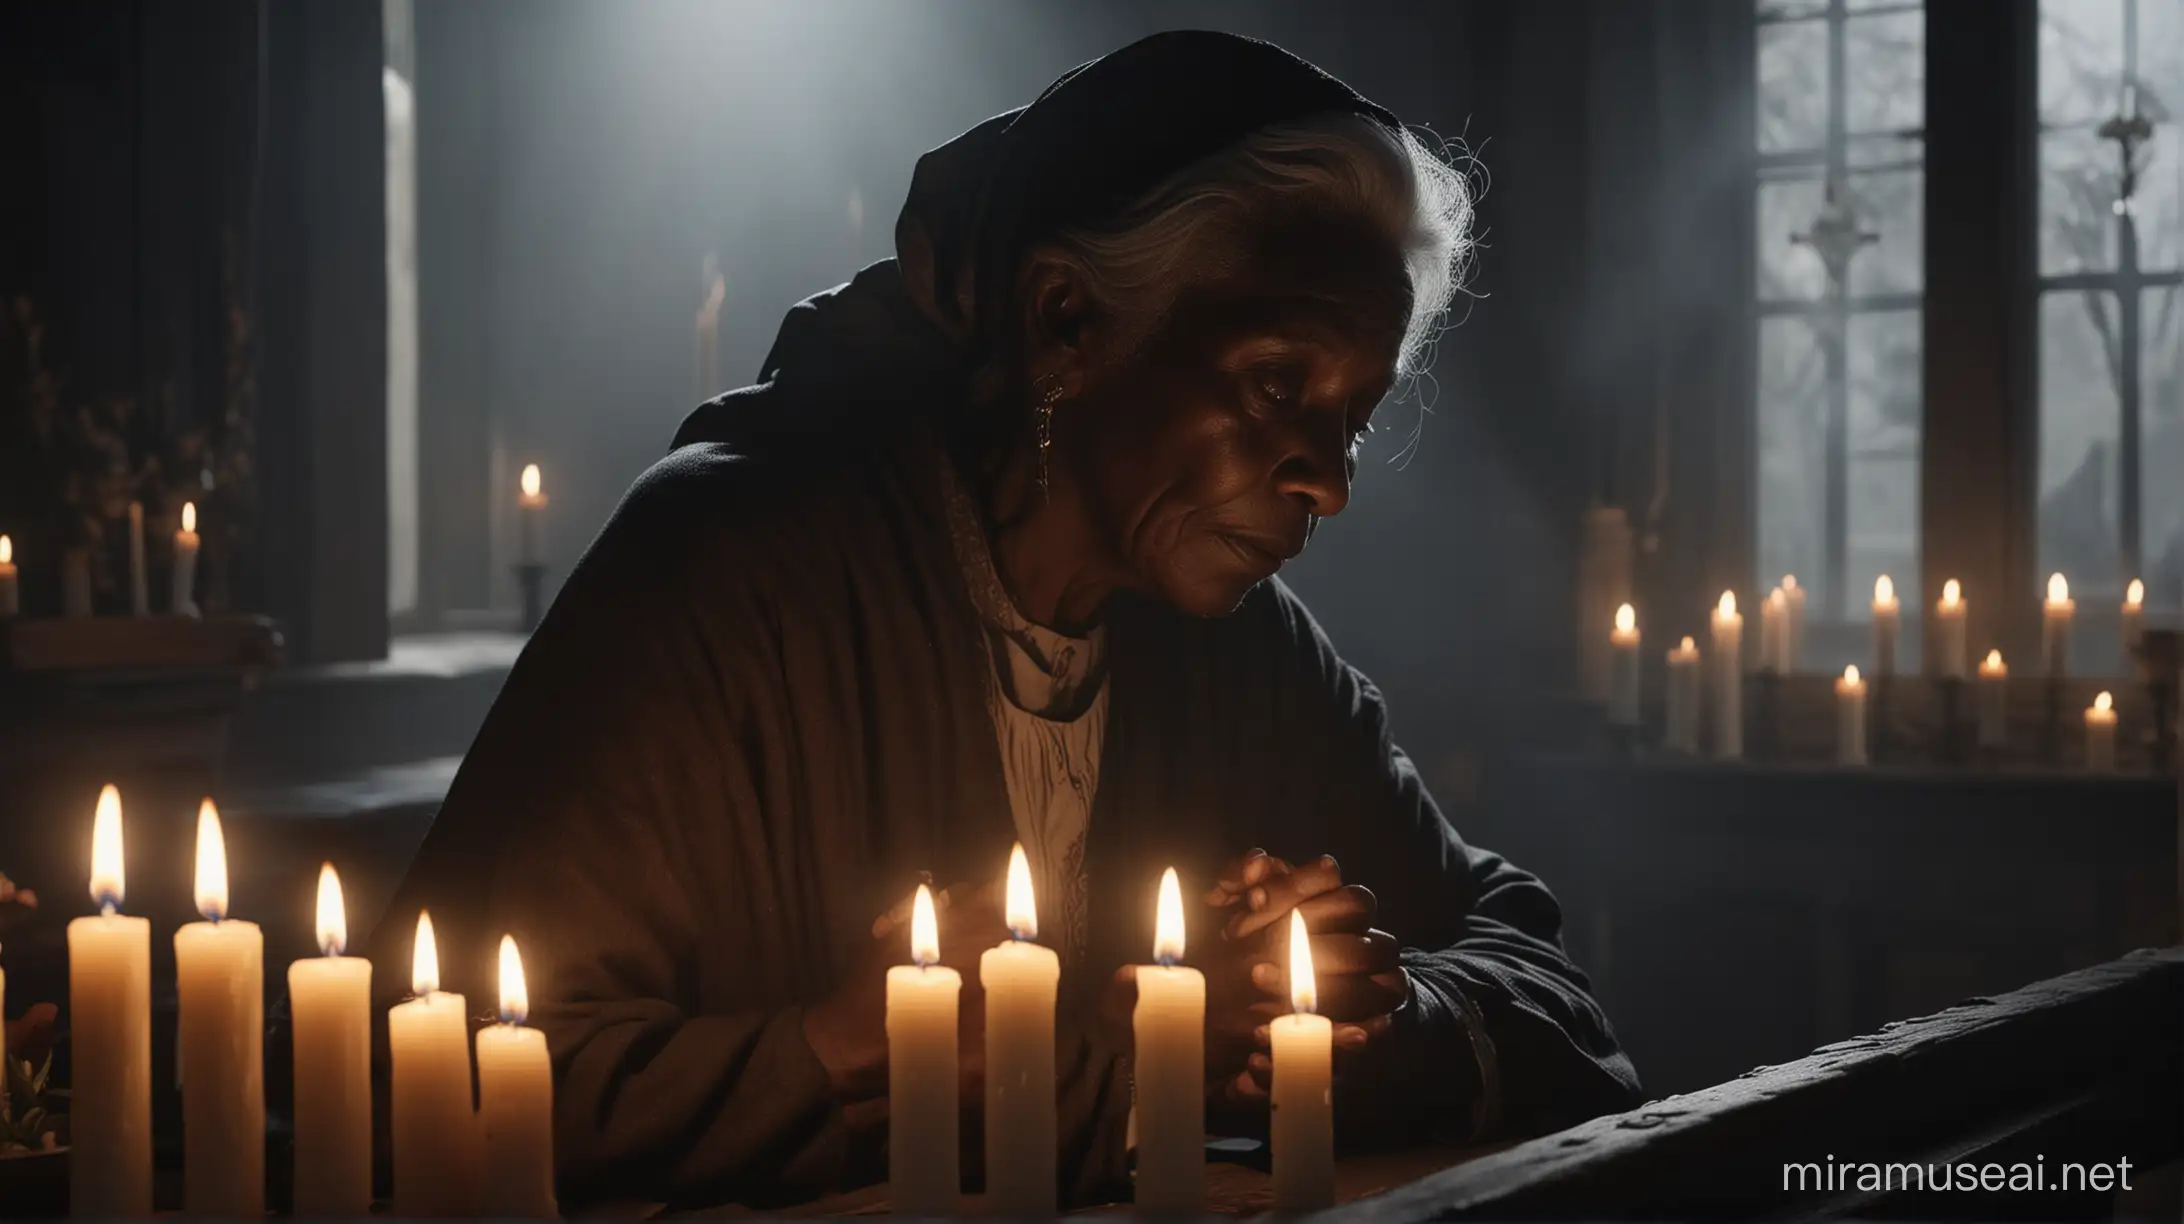 an old woman with black skin praying in a small simple church, with an altar full of candles, a dark environment, sunlight coming through the window, reflecting on the old woman, 8k realistic perfect.